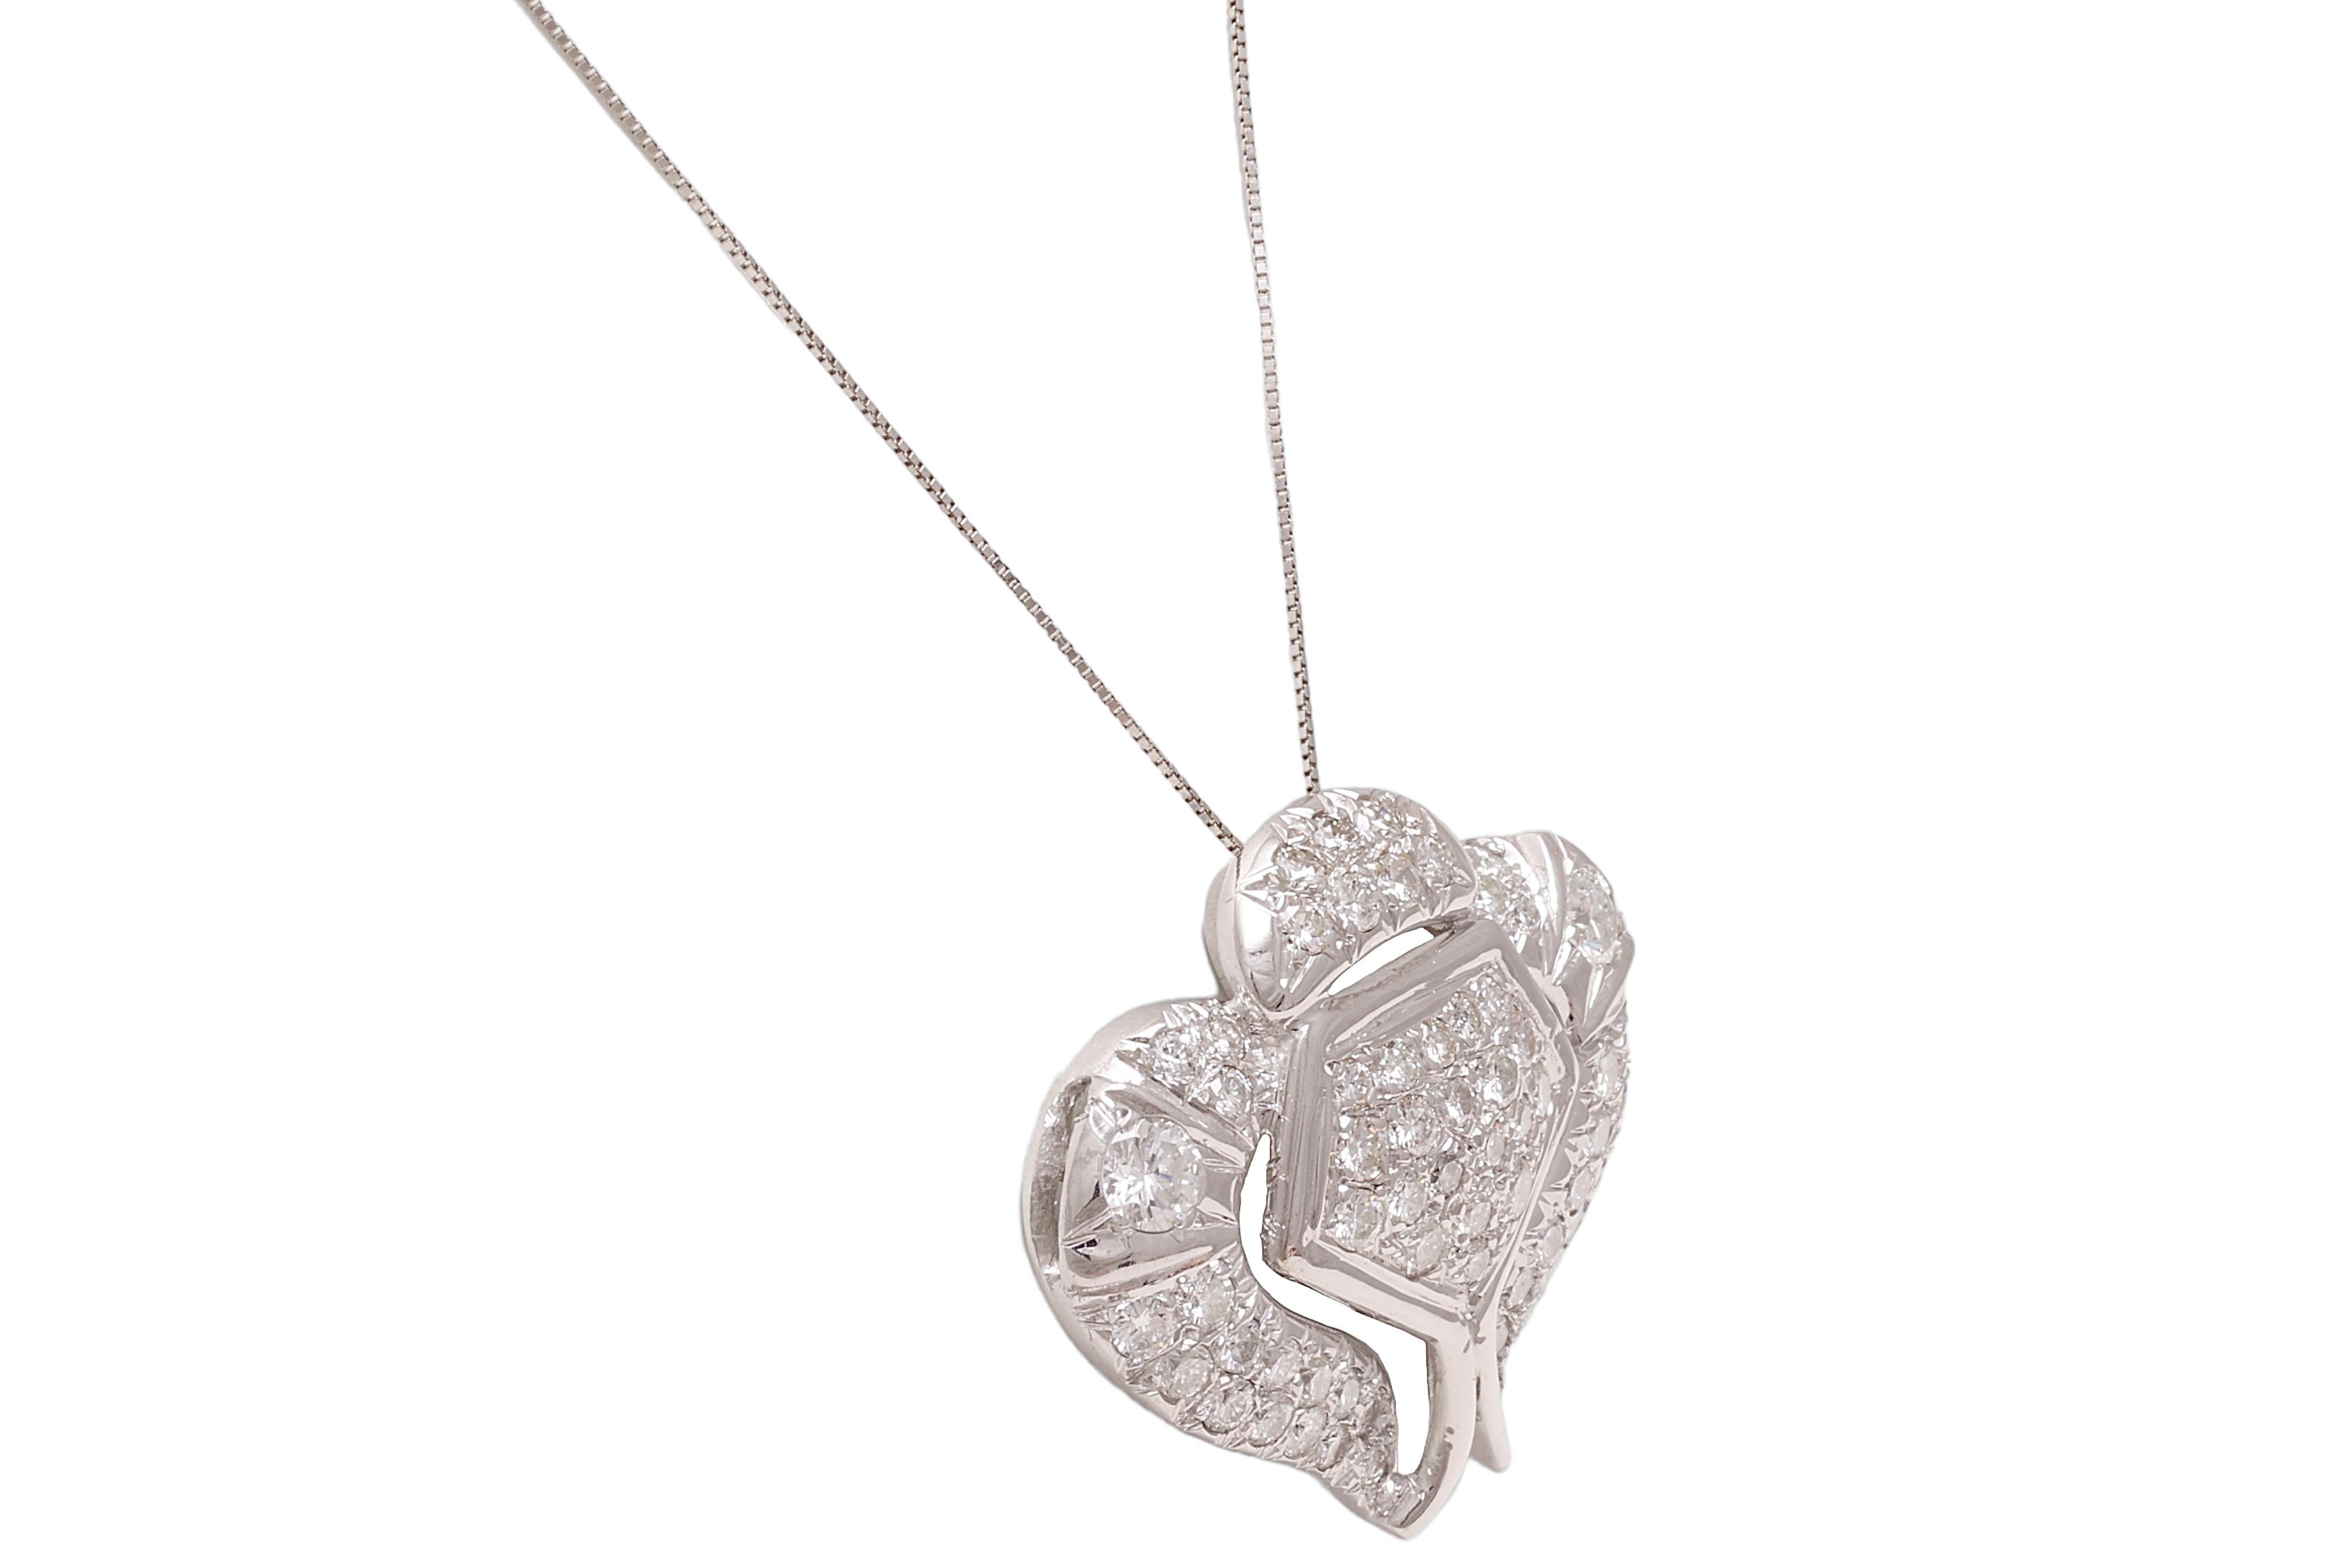 Brilliant Cut  18 kt. White Gold Necklace with 2.63 ct. Diamond Pendant  For Sale